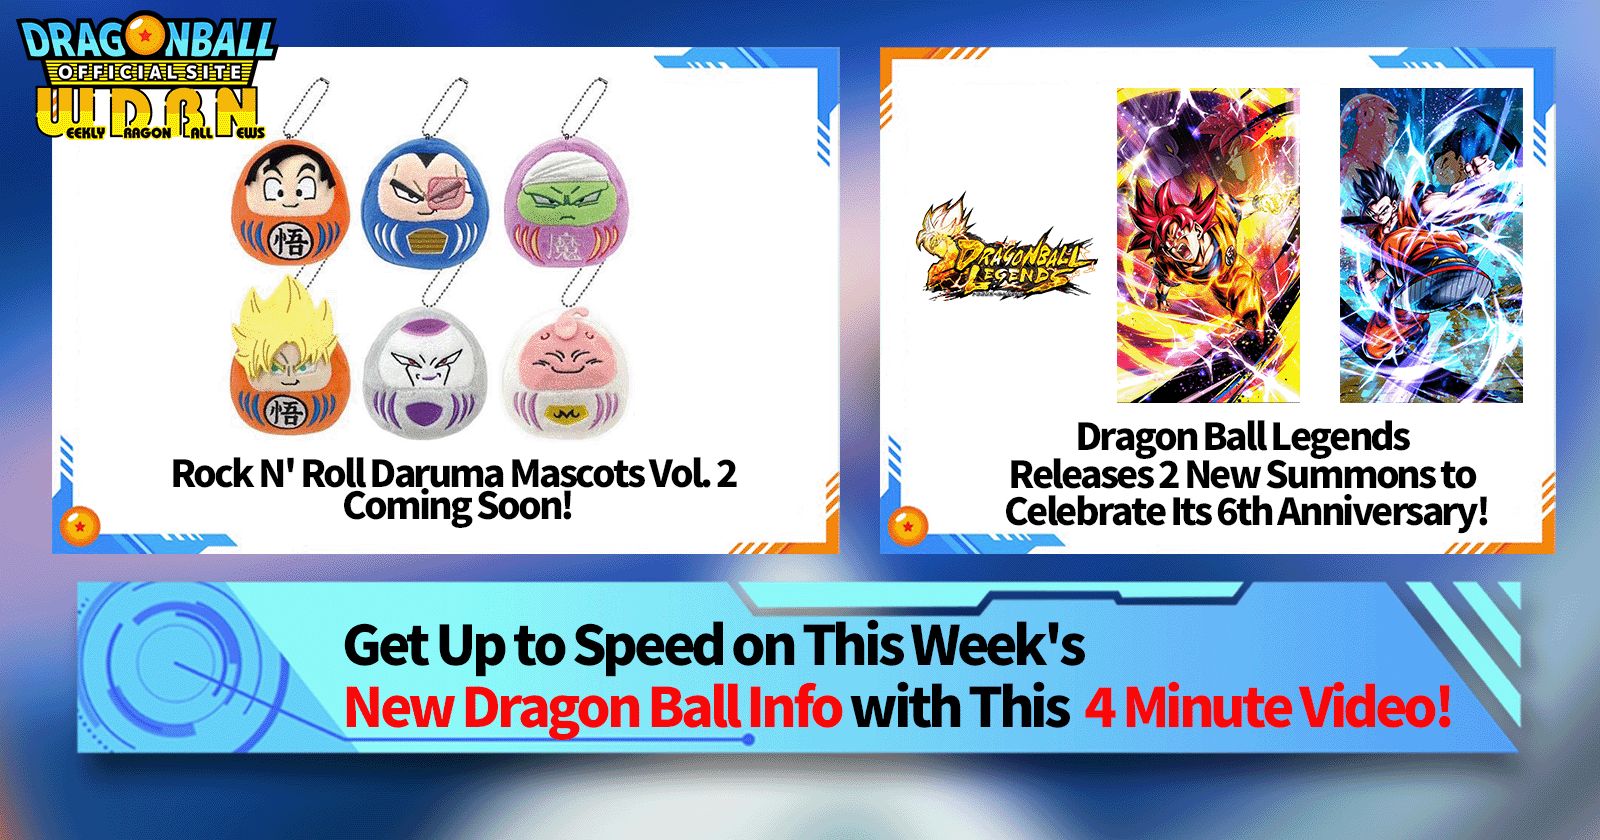 [June 24th] Weekly Dragon Ball News Broadcast!